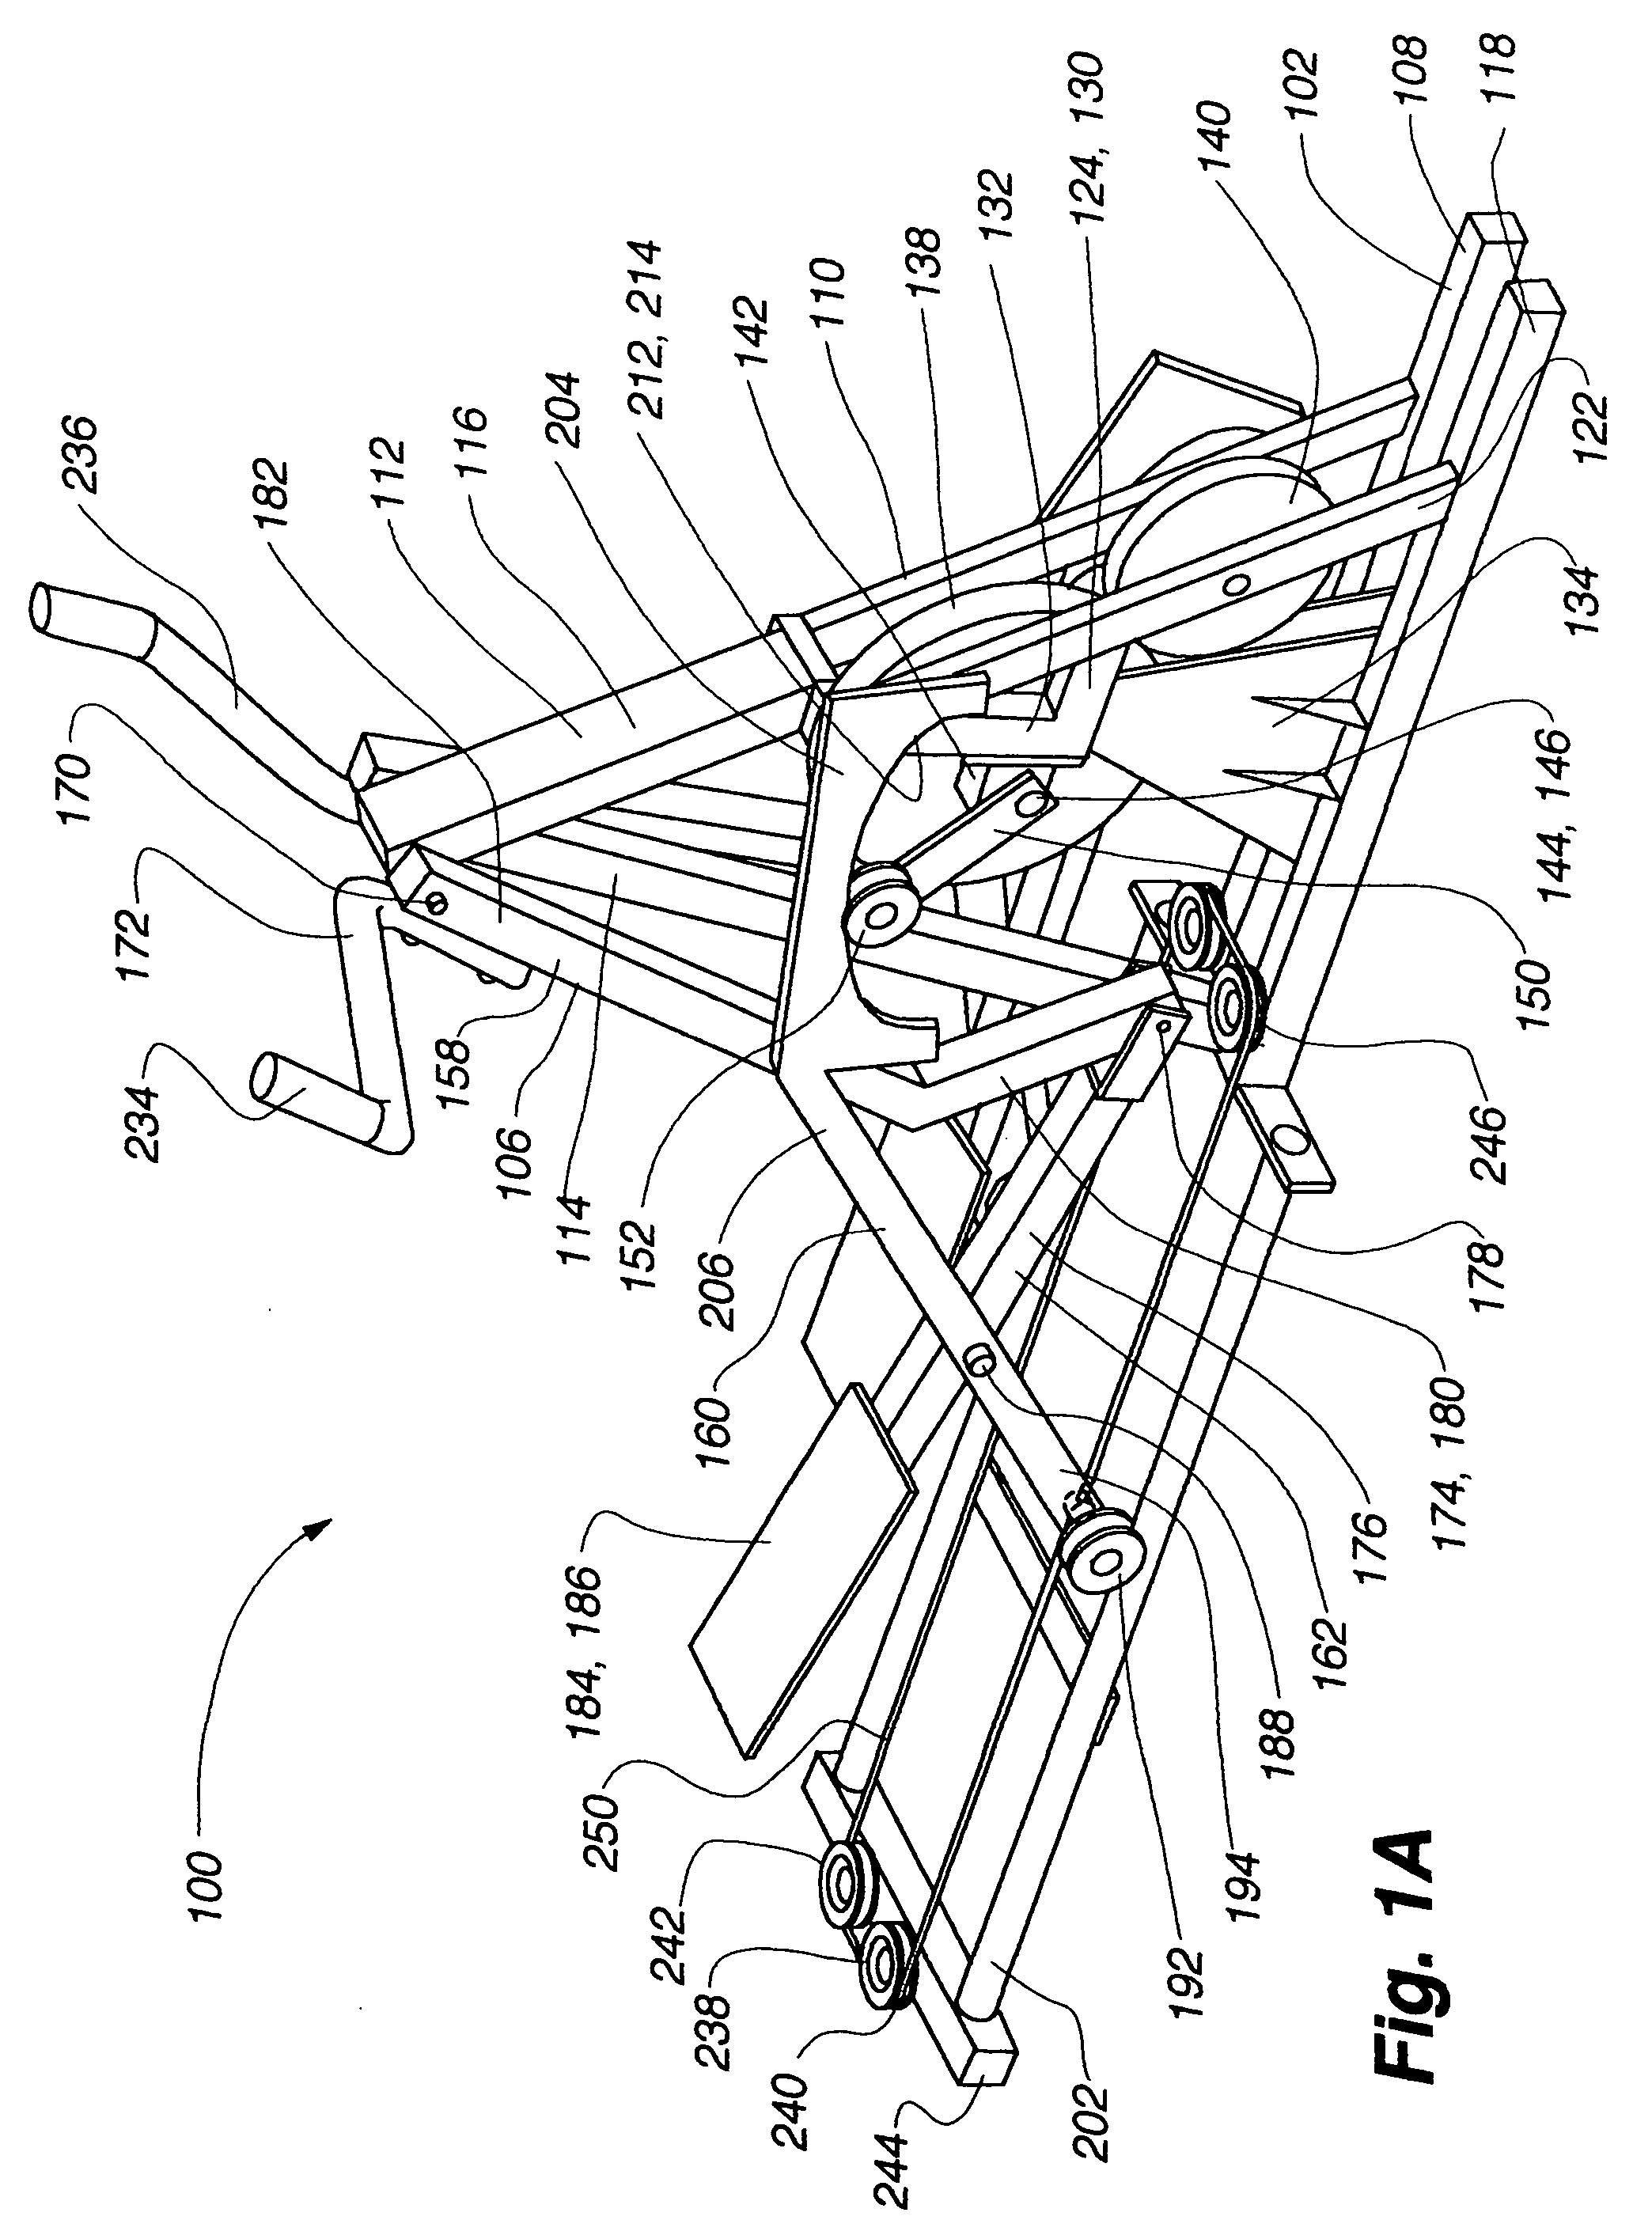 Variable stride exercise device